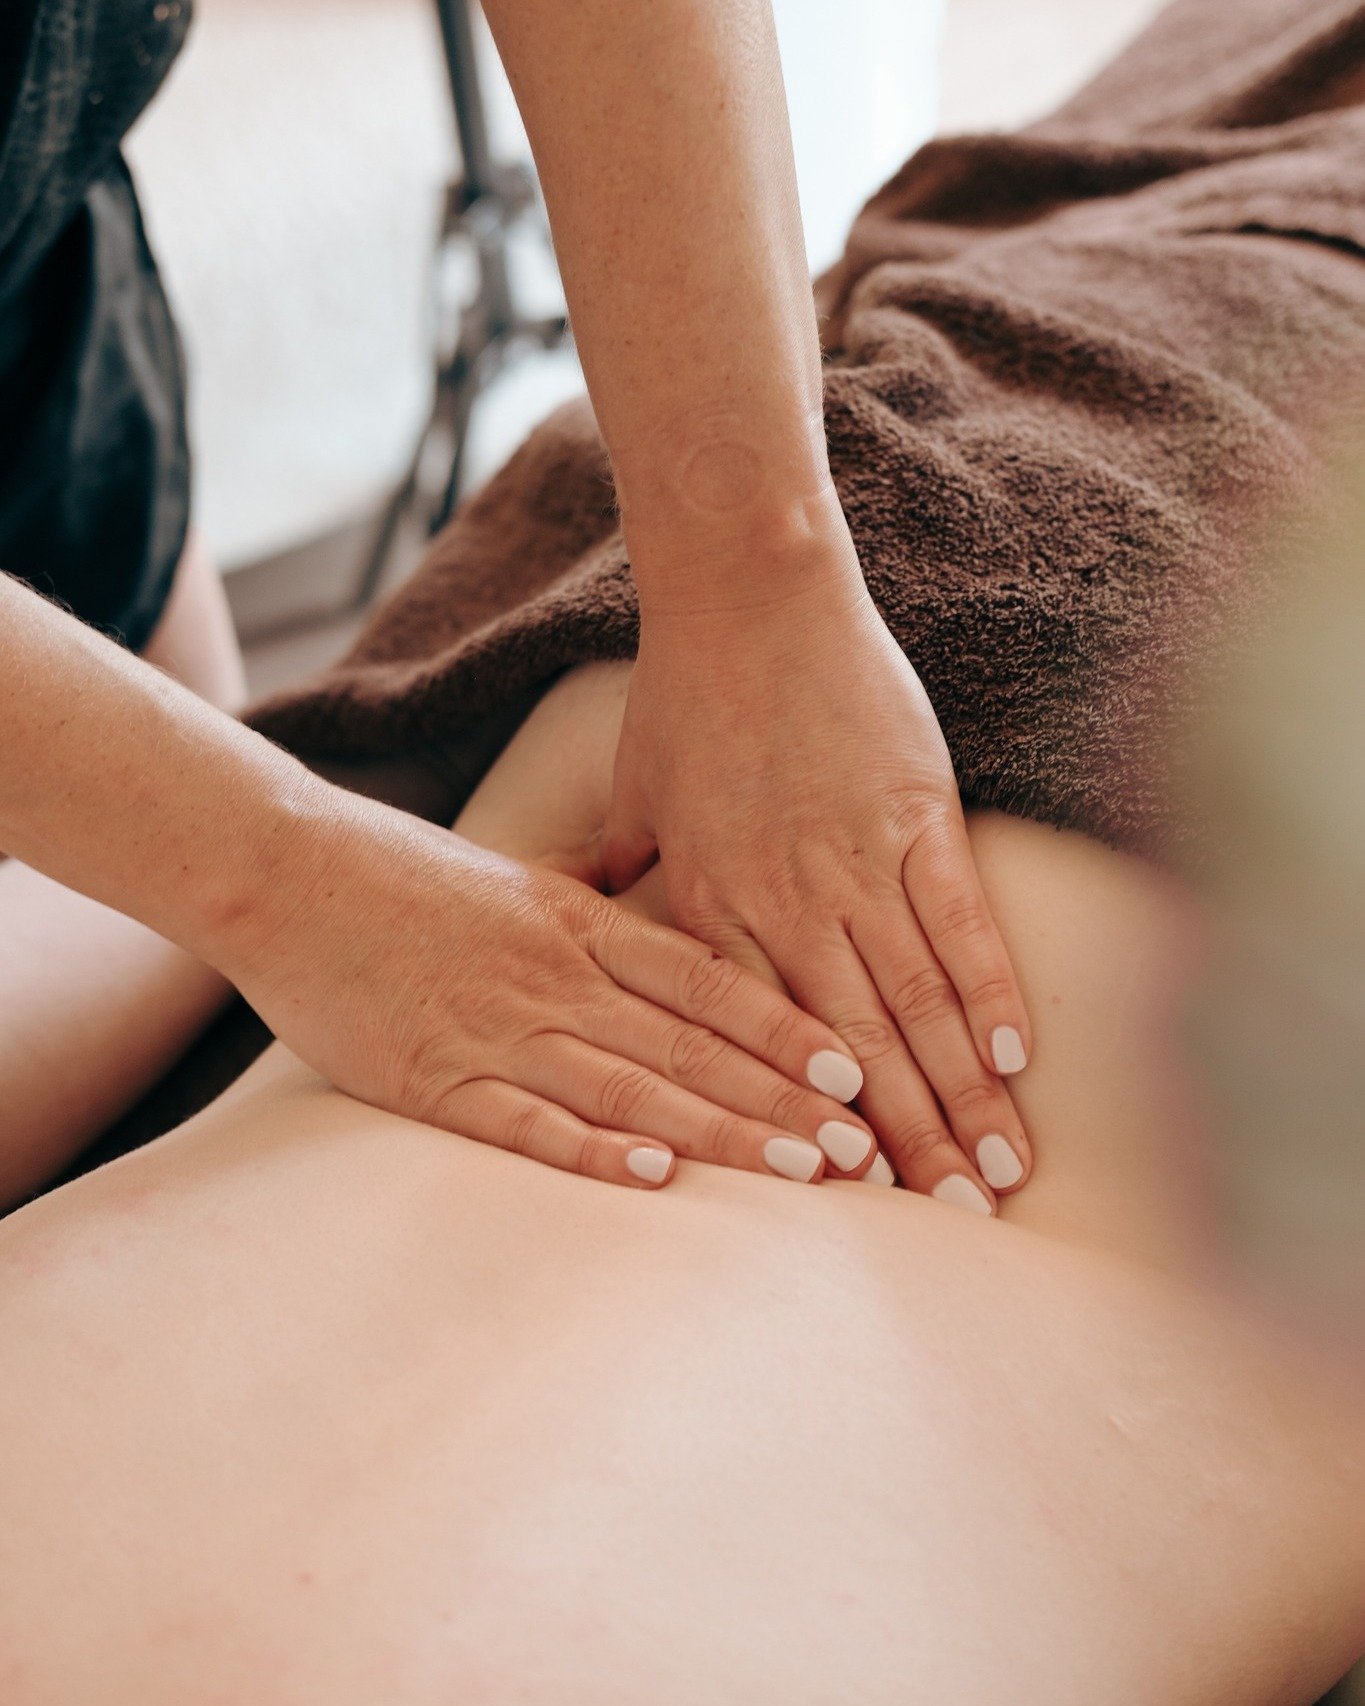 You know you're old when your back goes out more than you do 😉 that's why we're here... 

to relax, rejuvenate and repair your muscles, so you can enjoy your nights in AND your nights out.

#massage #verbier #backmassage #massagetherapy #wellness #s